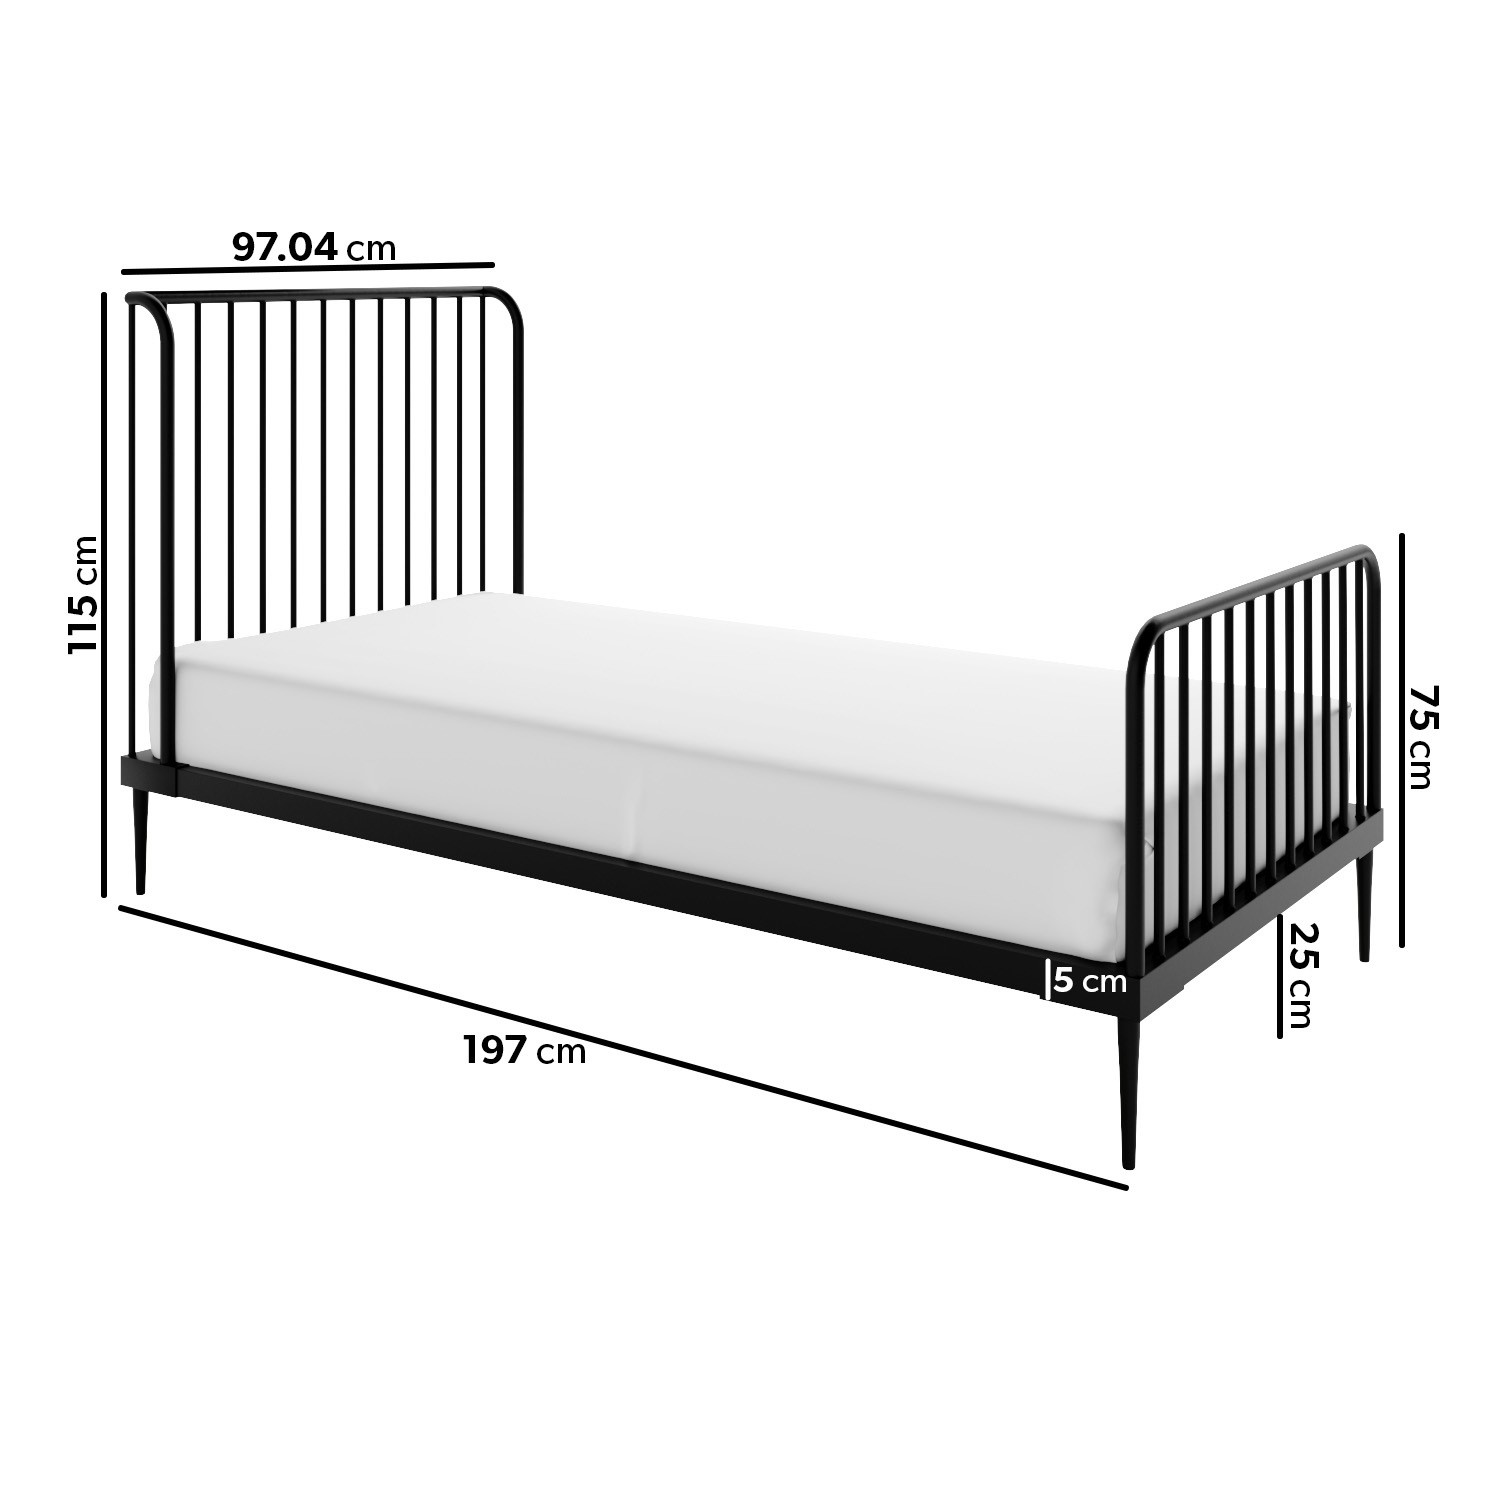 Read more about Single black metal bed frame jackson